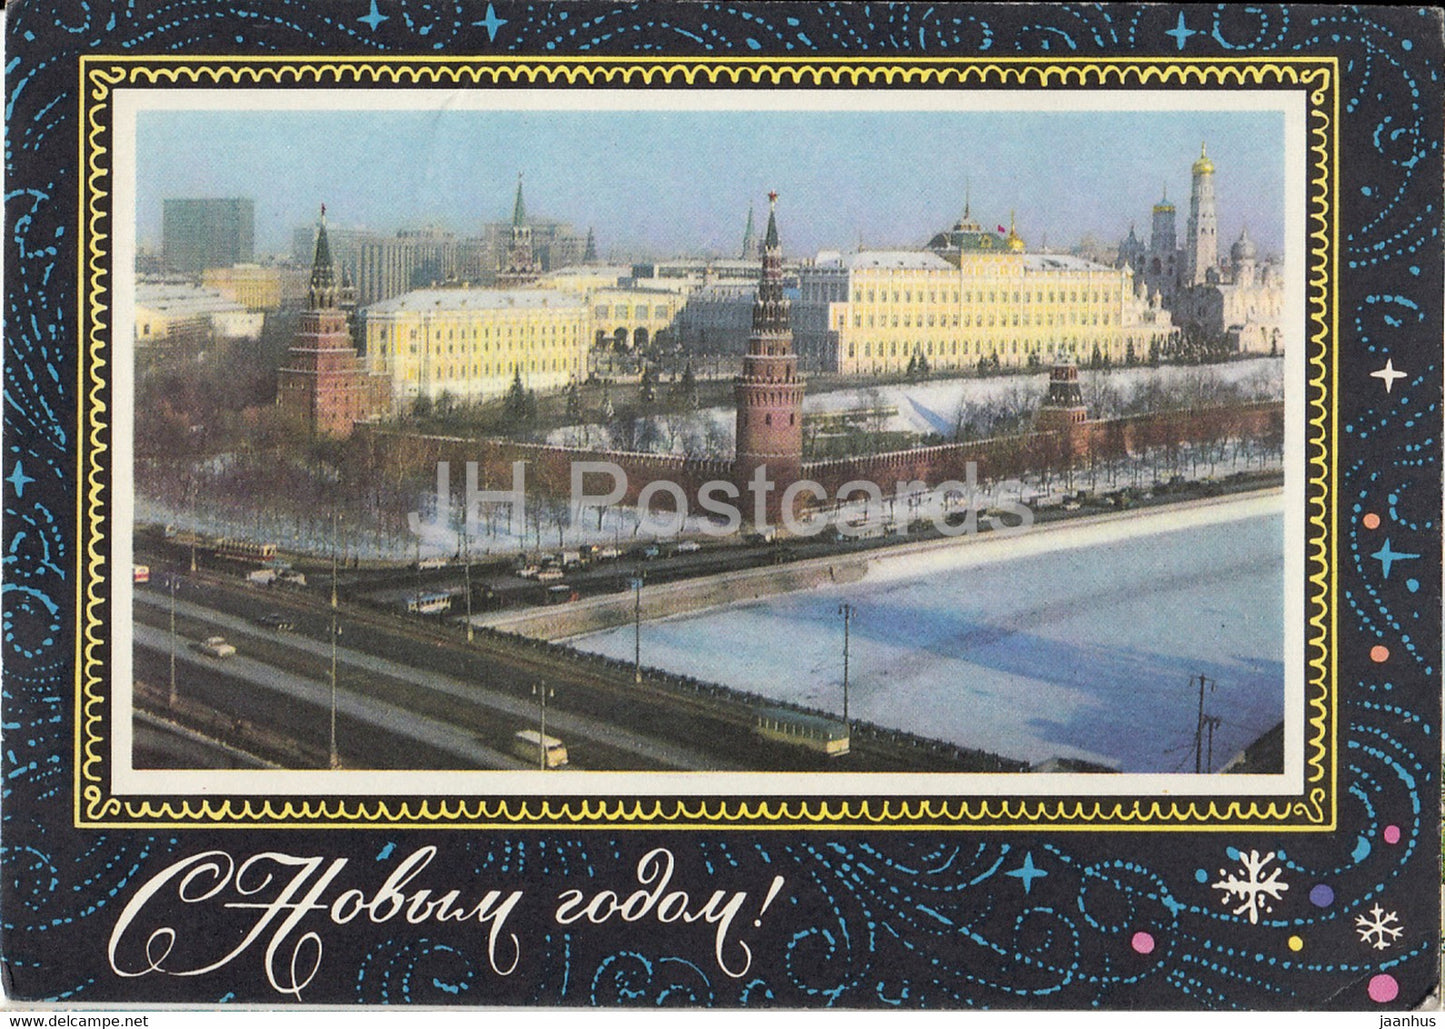 New Year Greeting Card - Moscow Kremlin - postal stationery - 1972 - Russia USSR - unused - JH Postcards